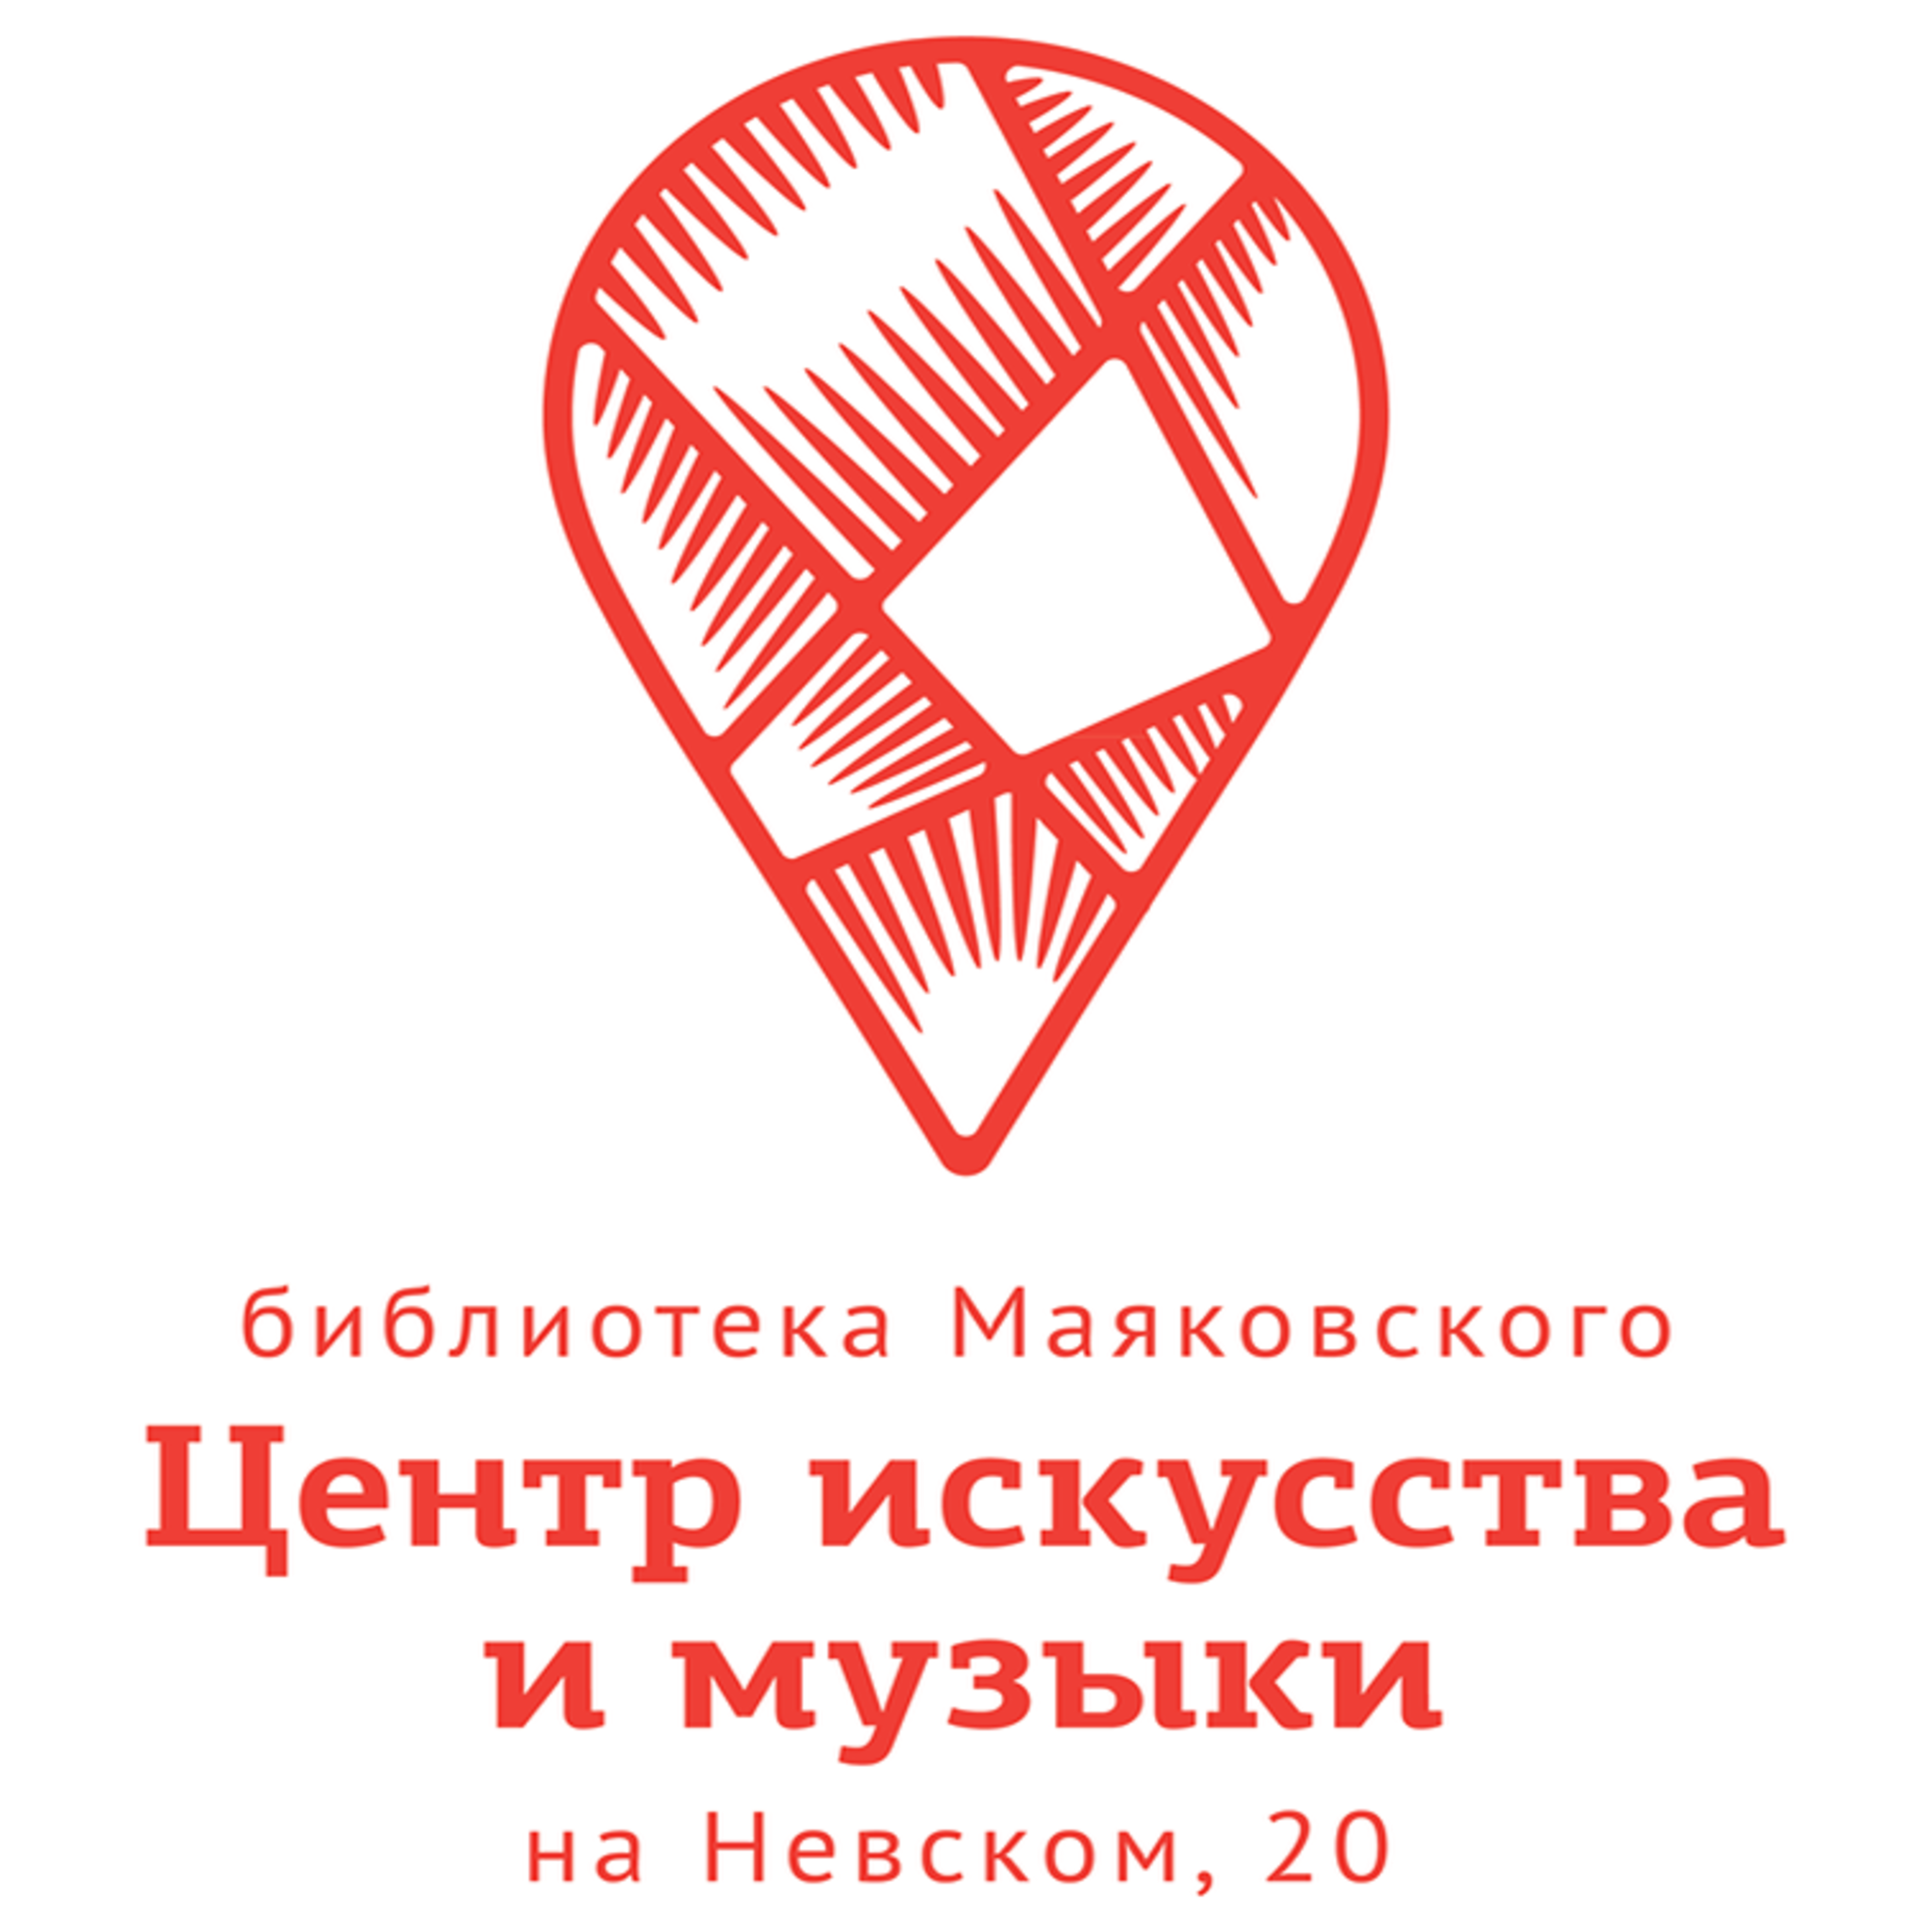 Schedule of events at the Center for Art Library Mayakovsky from 16 to 22 November 2015